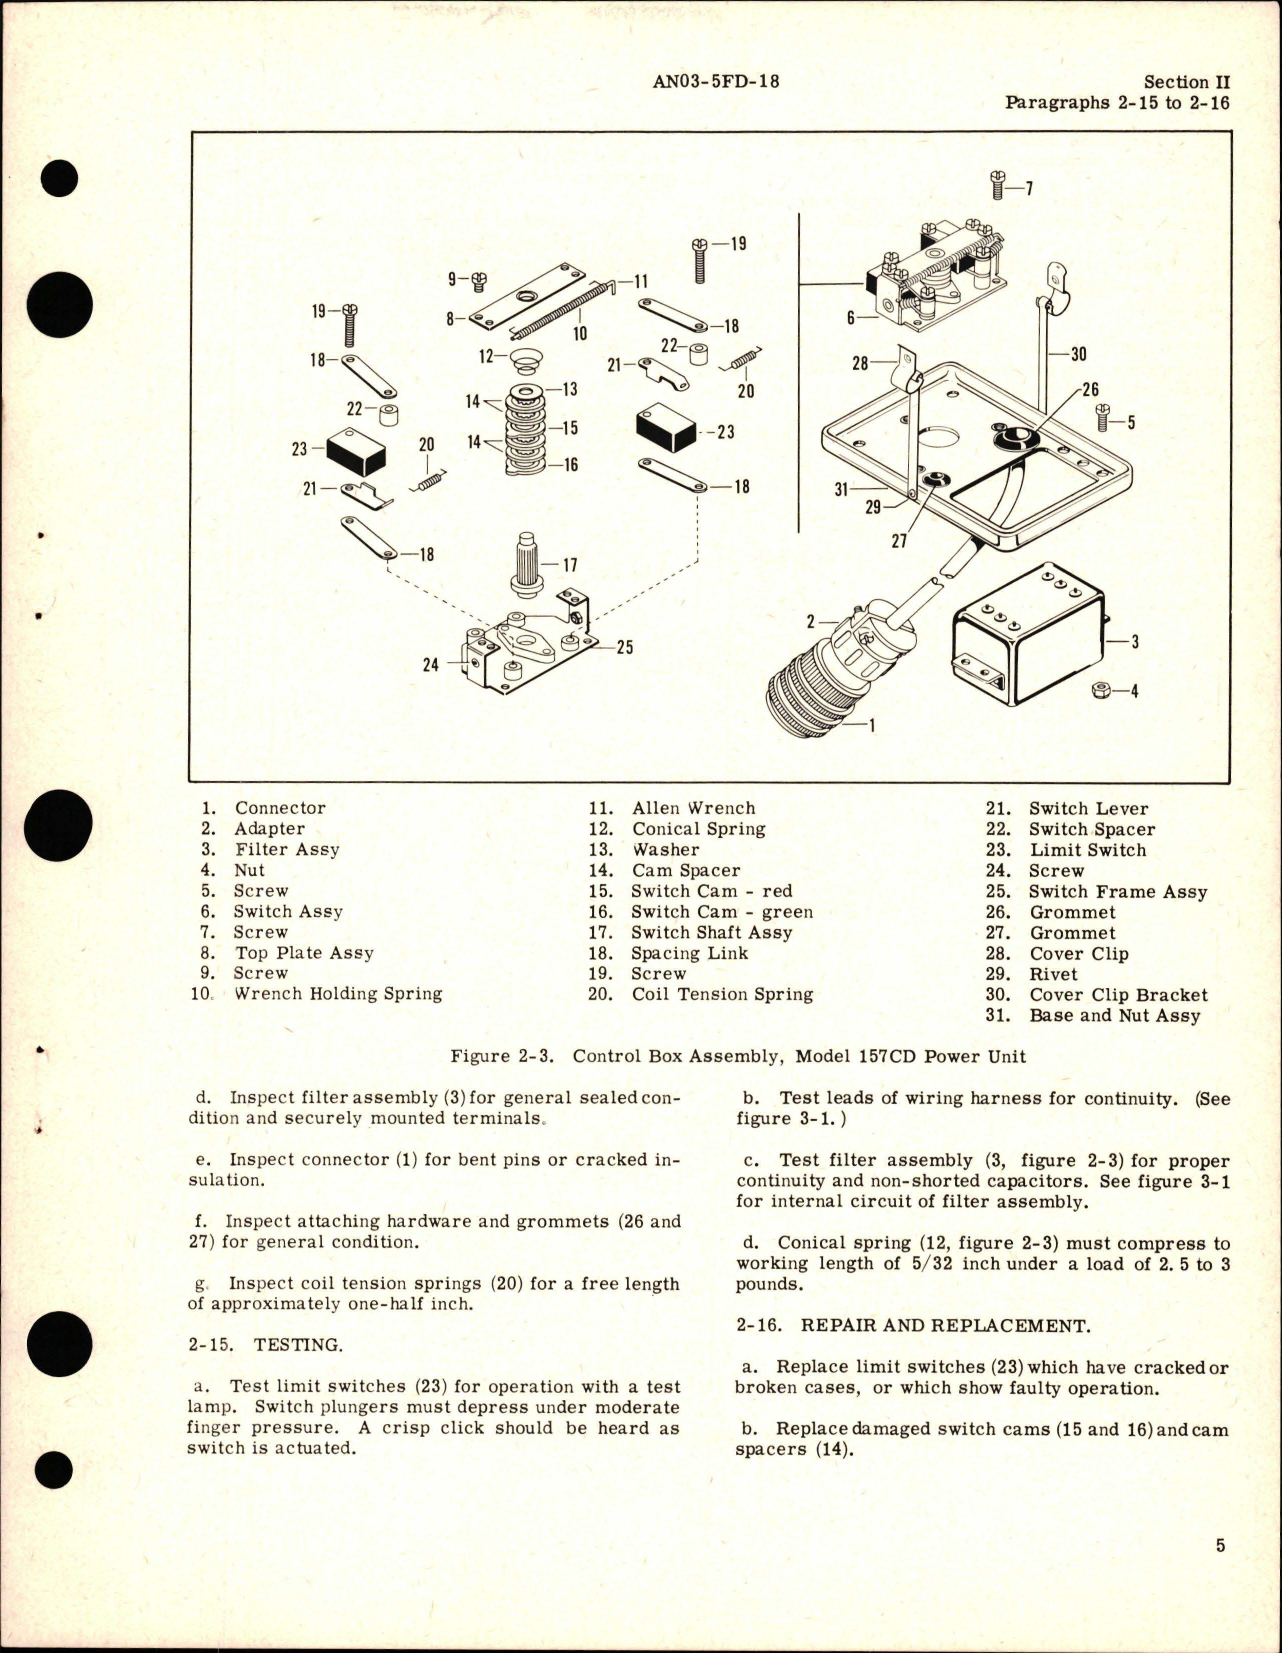 Sample page 7 from AirCorps Library document: Overhaul Instructions for Power Unit 